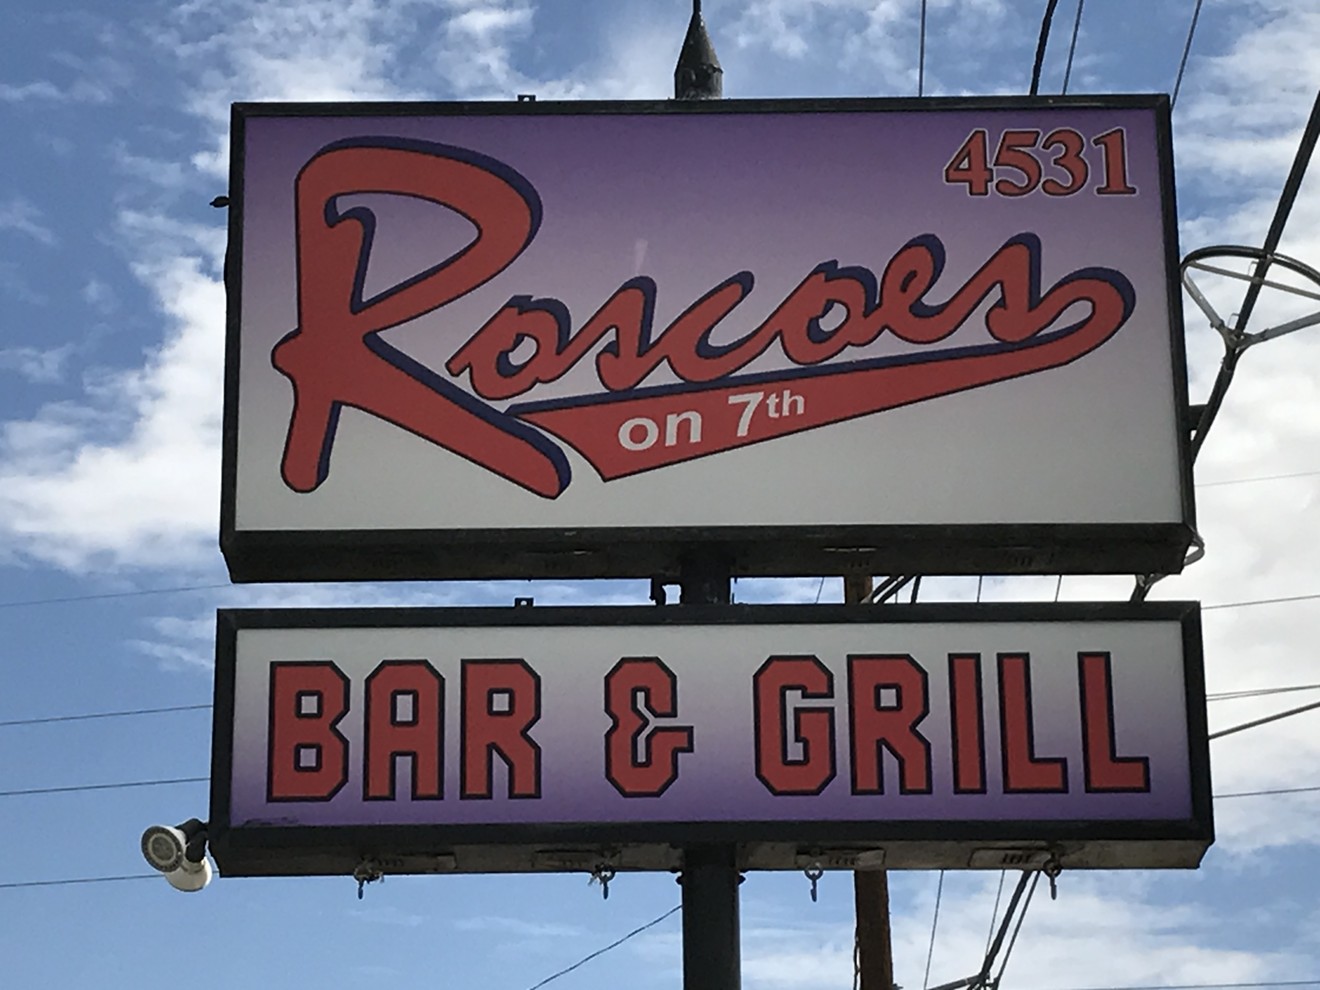 The Roscoes Bar & Grill sign was still up on Tuesday, August 1.